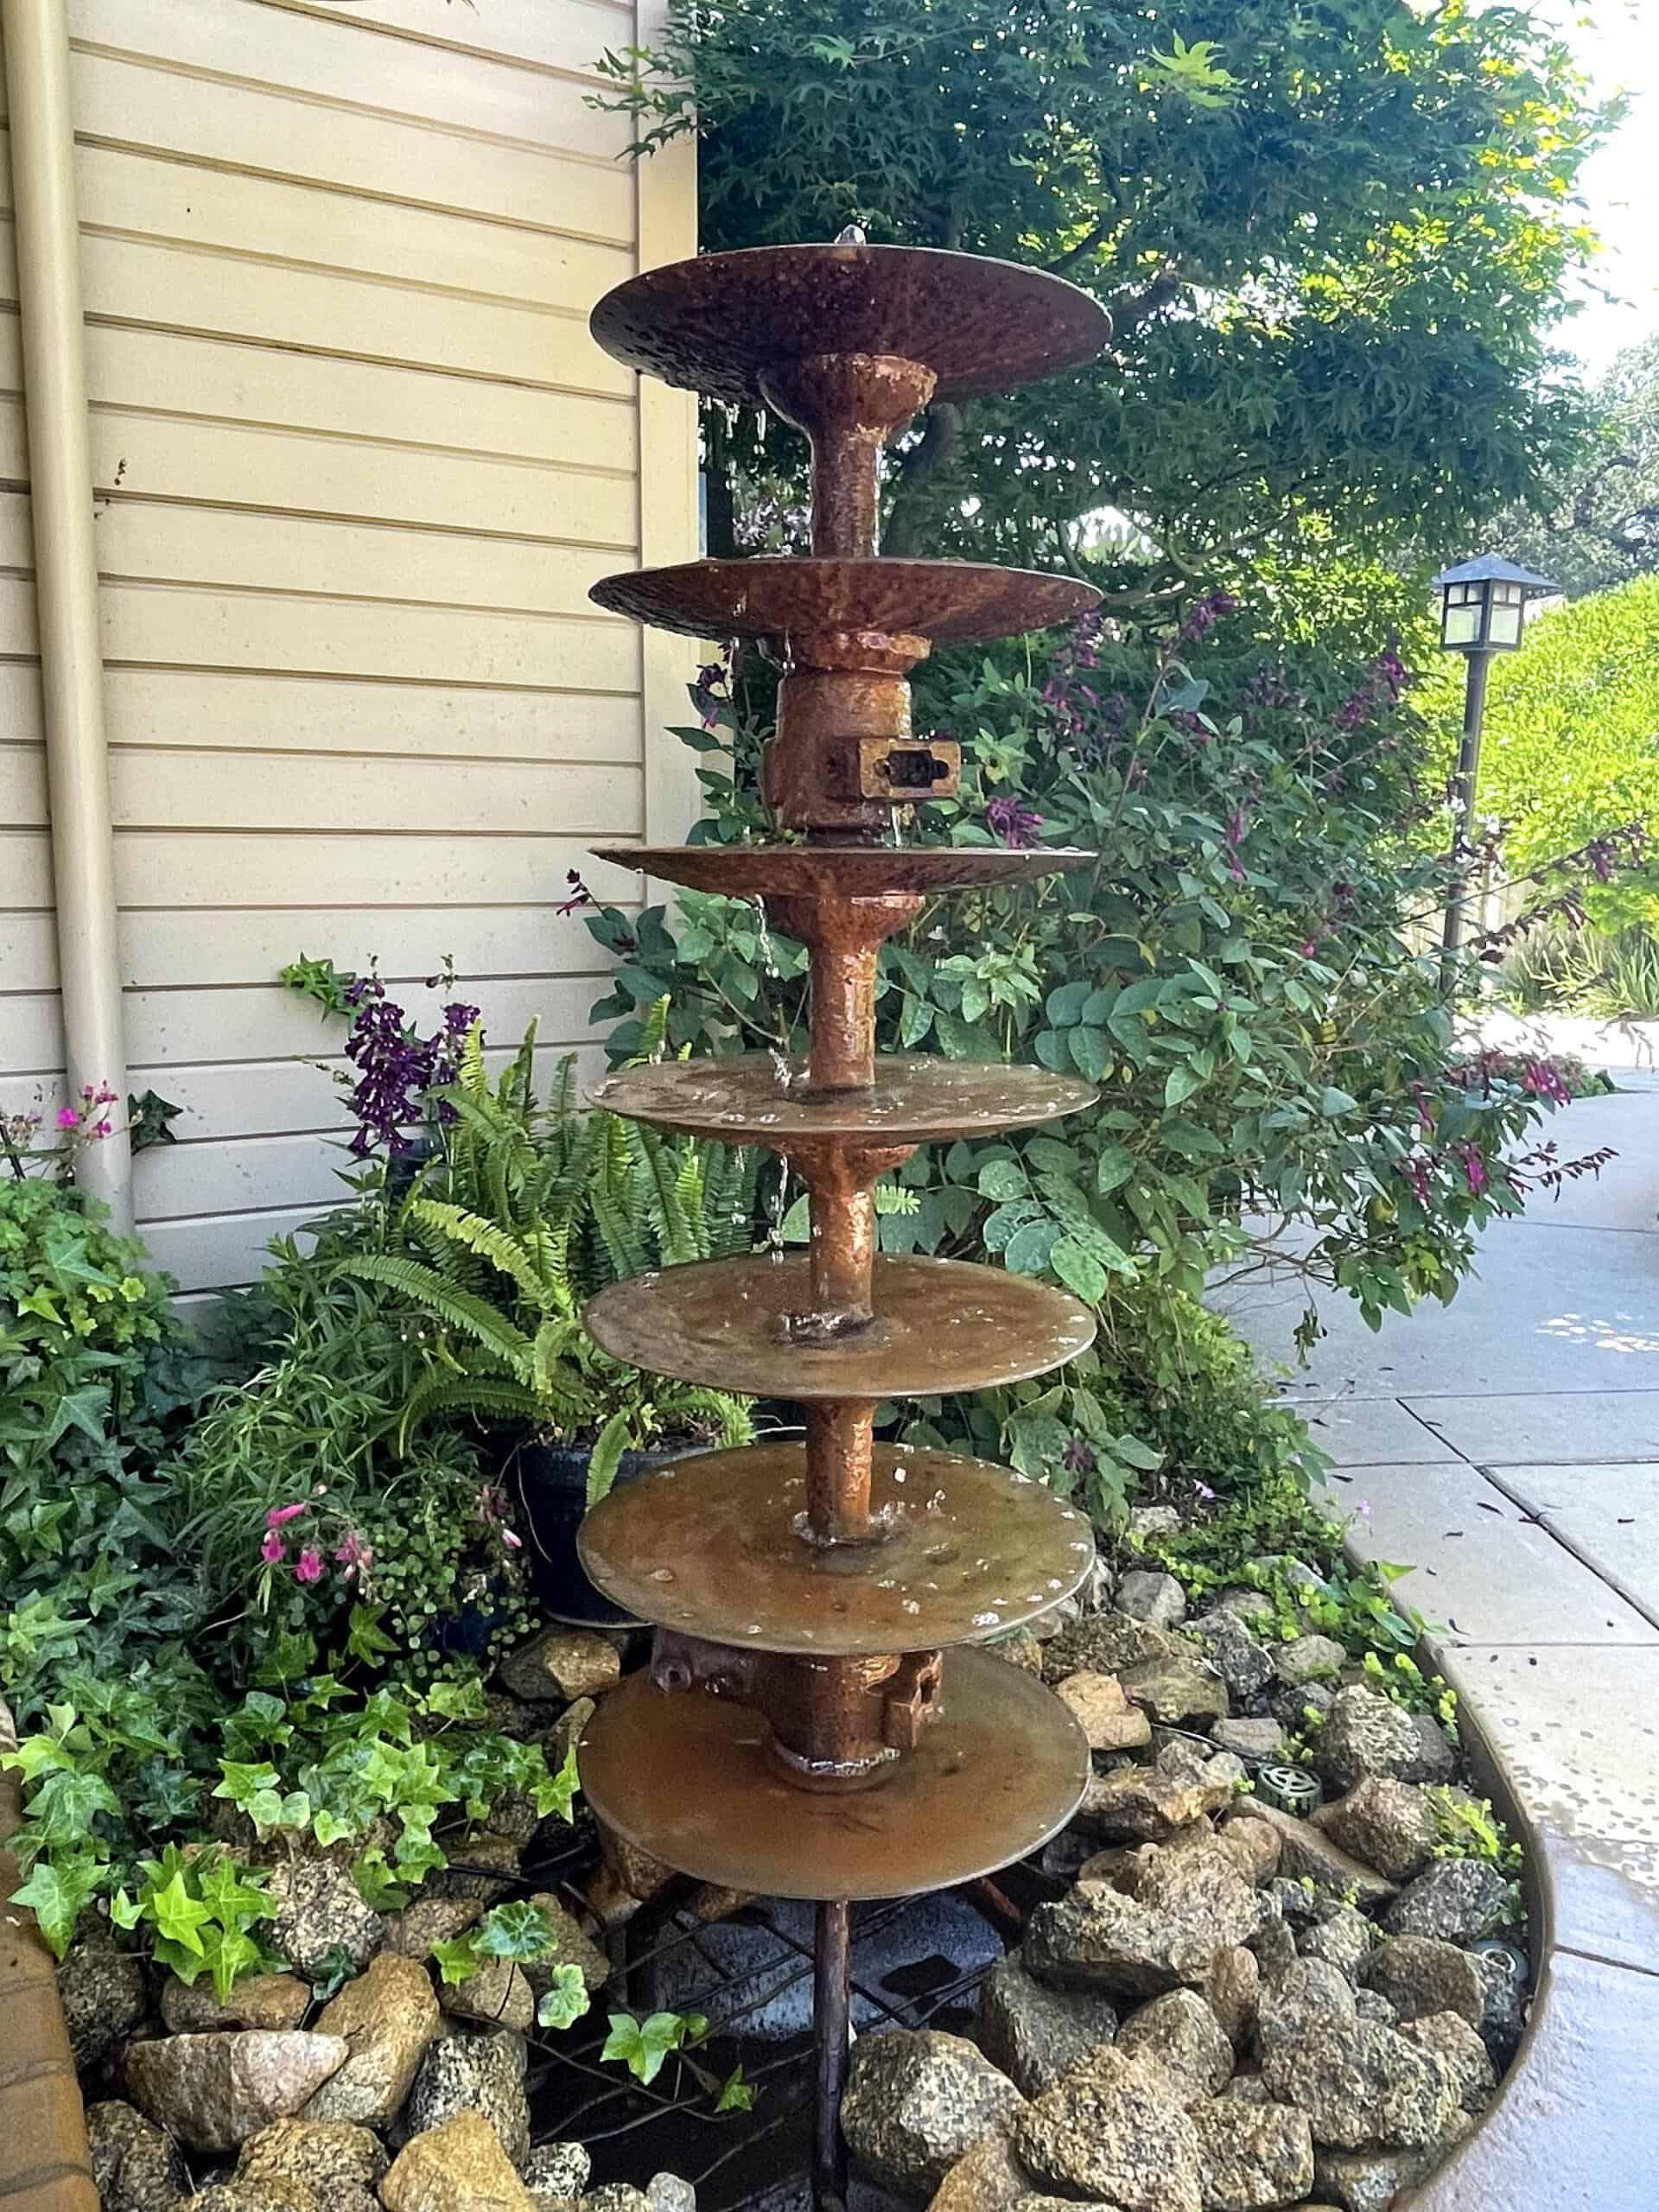 How to make a Small Outdoor Fountain from a Tractor Disc